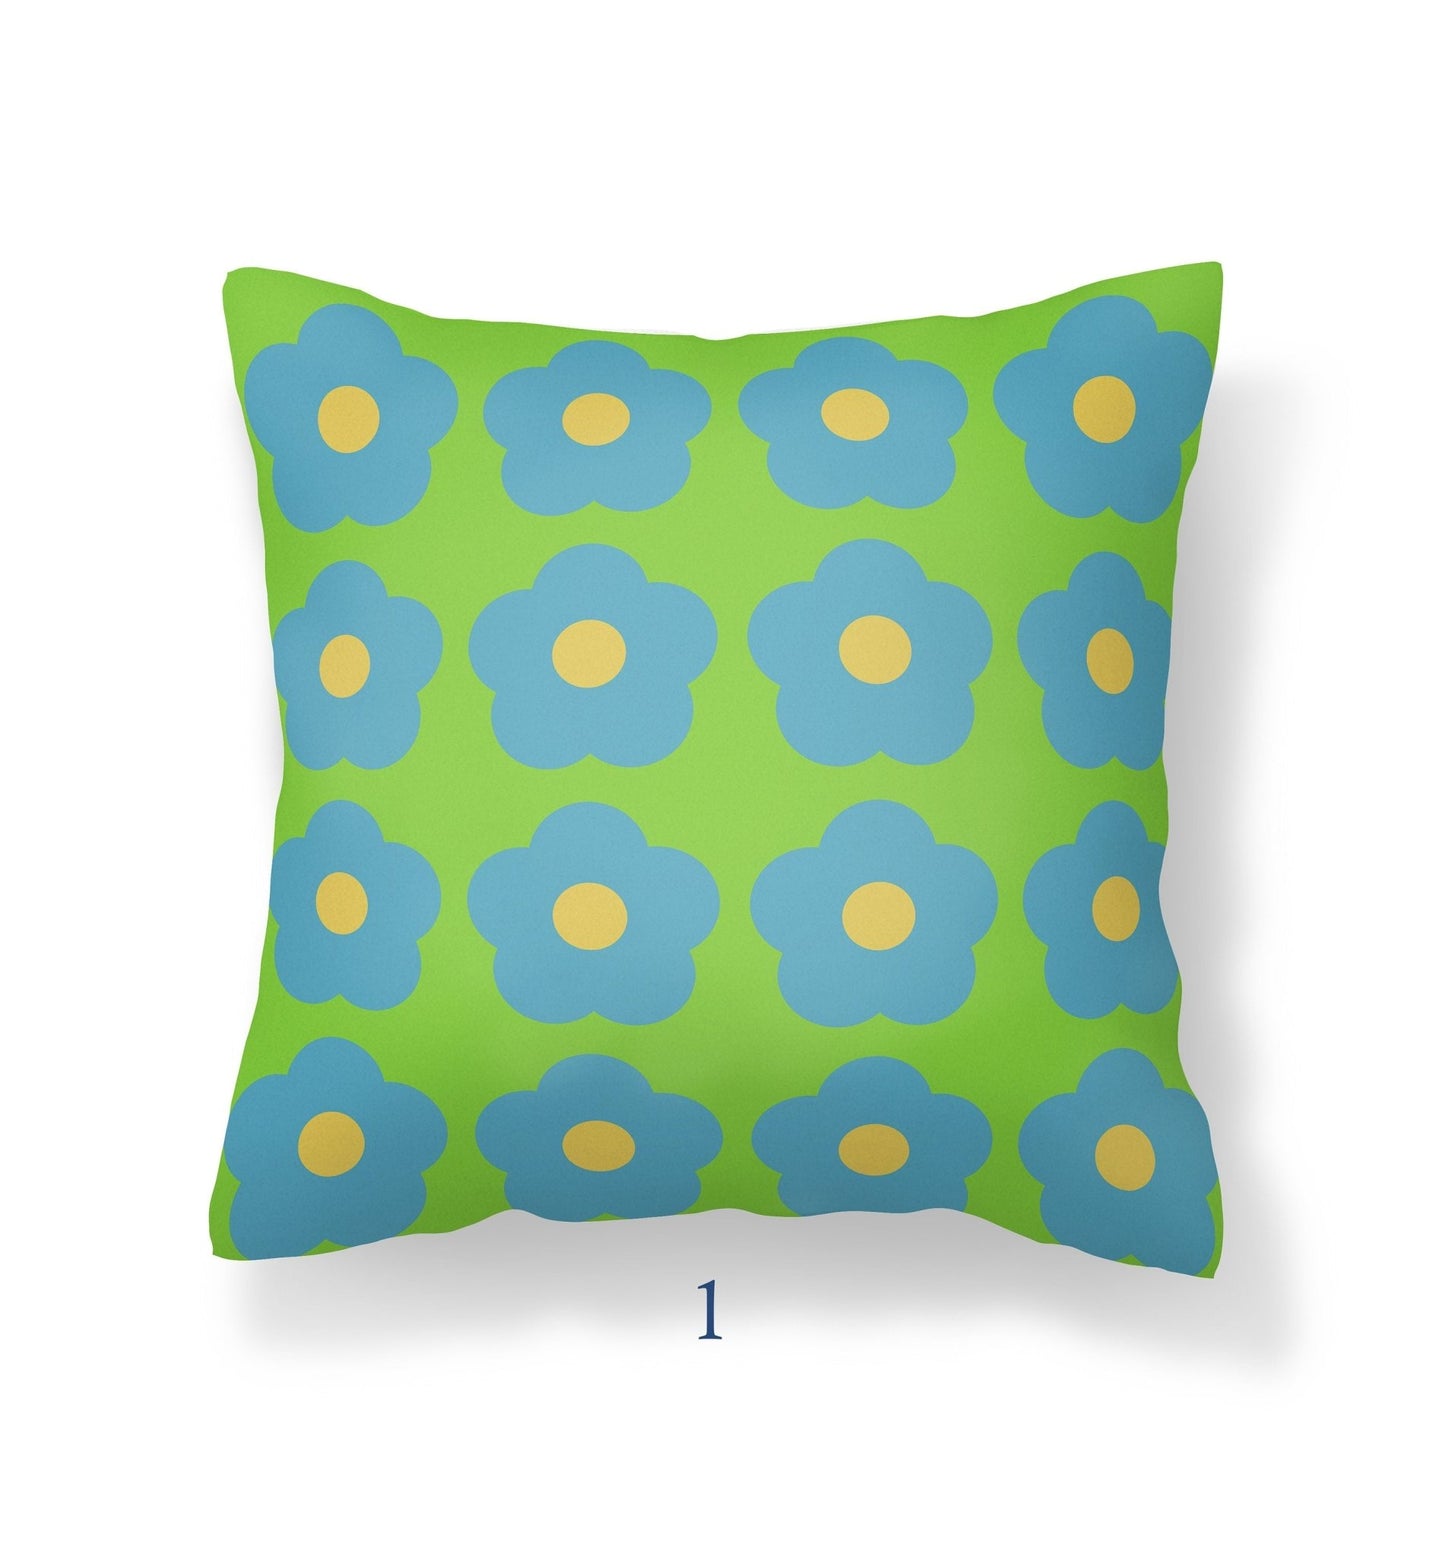 Blue and Green Striped Outdoor Pillows - Mix and Match